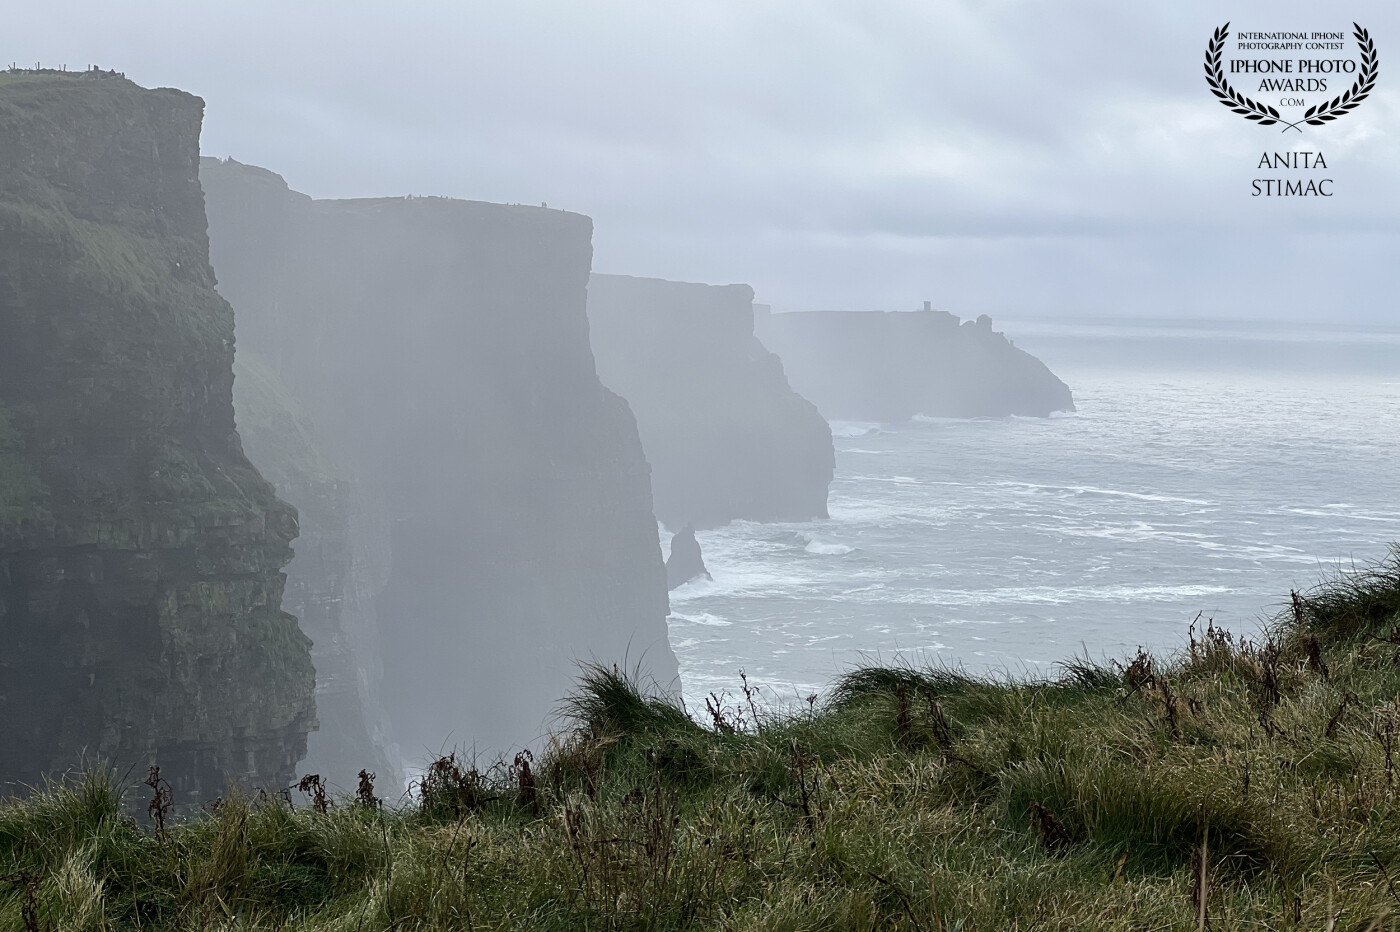 The majestic Cliffs of Moher, fading into the closing fog with not another soul in sight. Ireland’s largest tourist attraction.